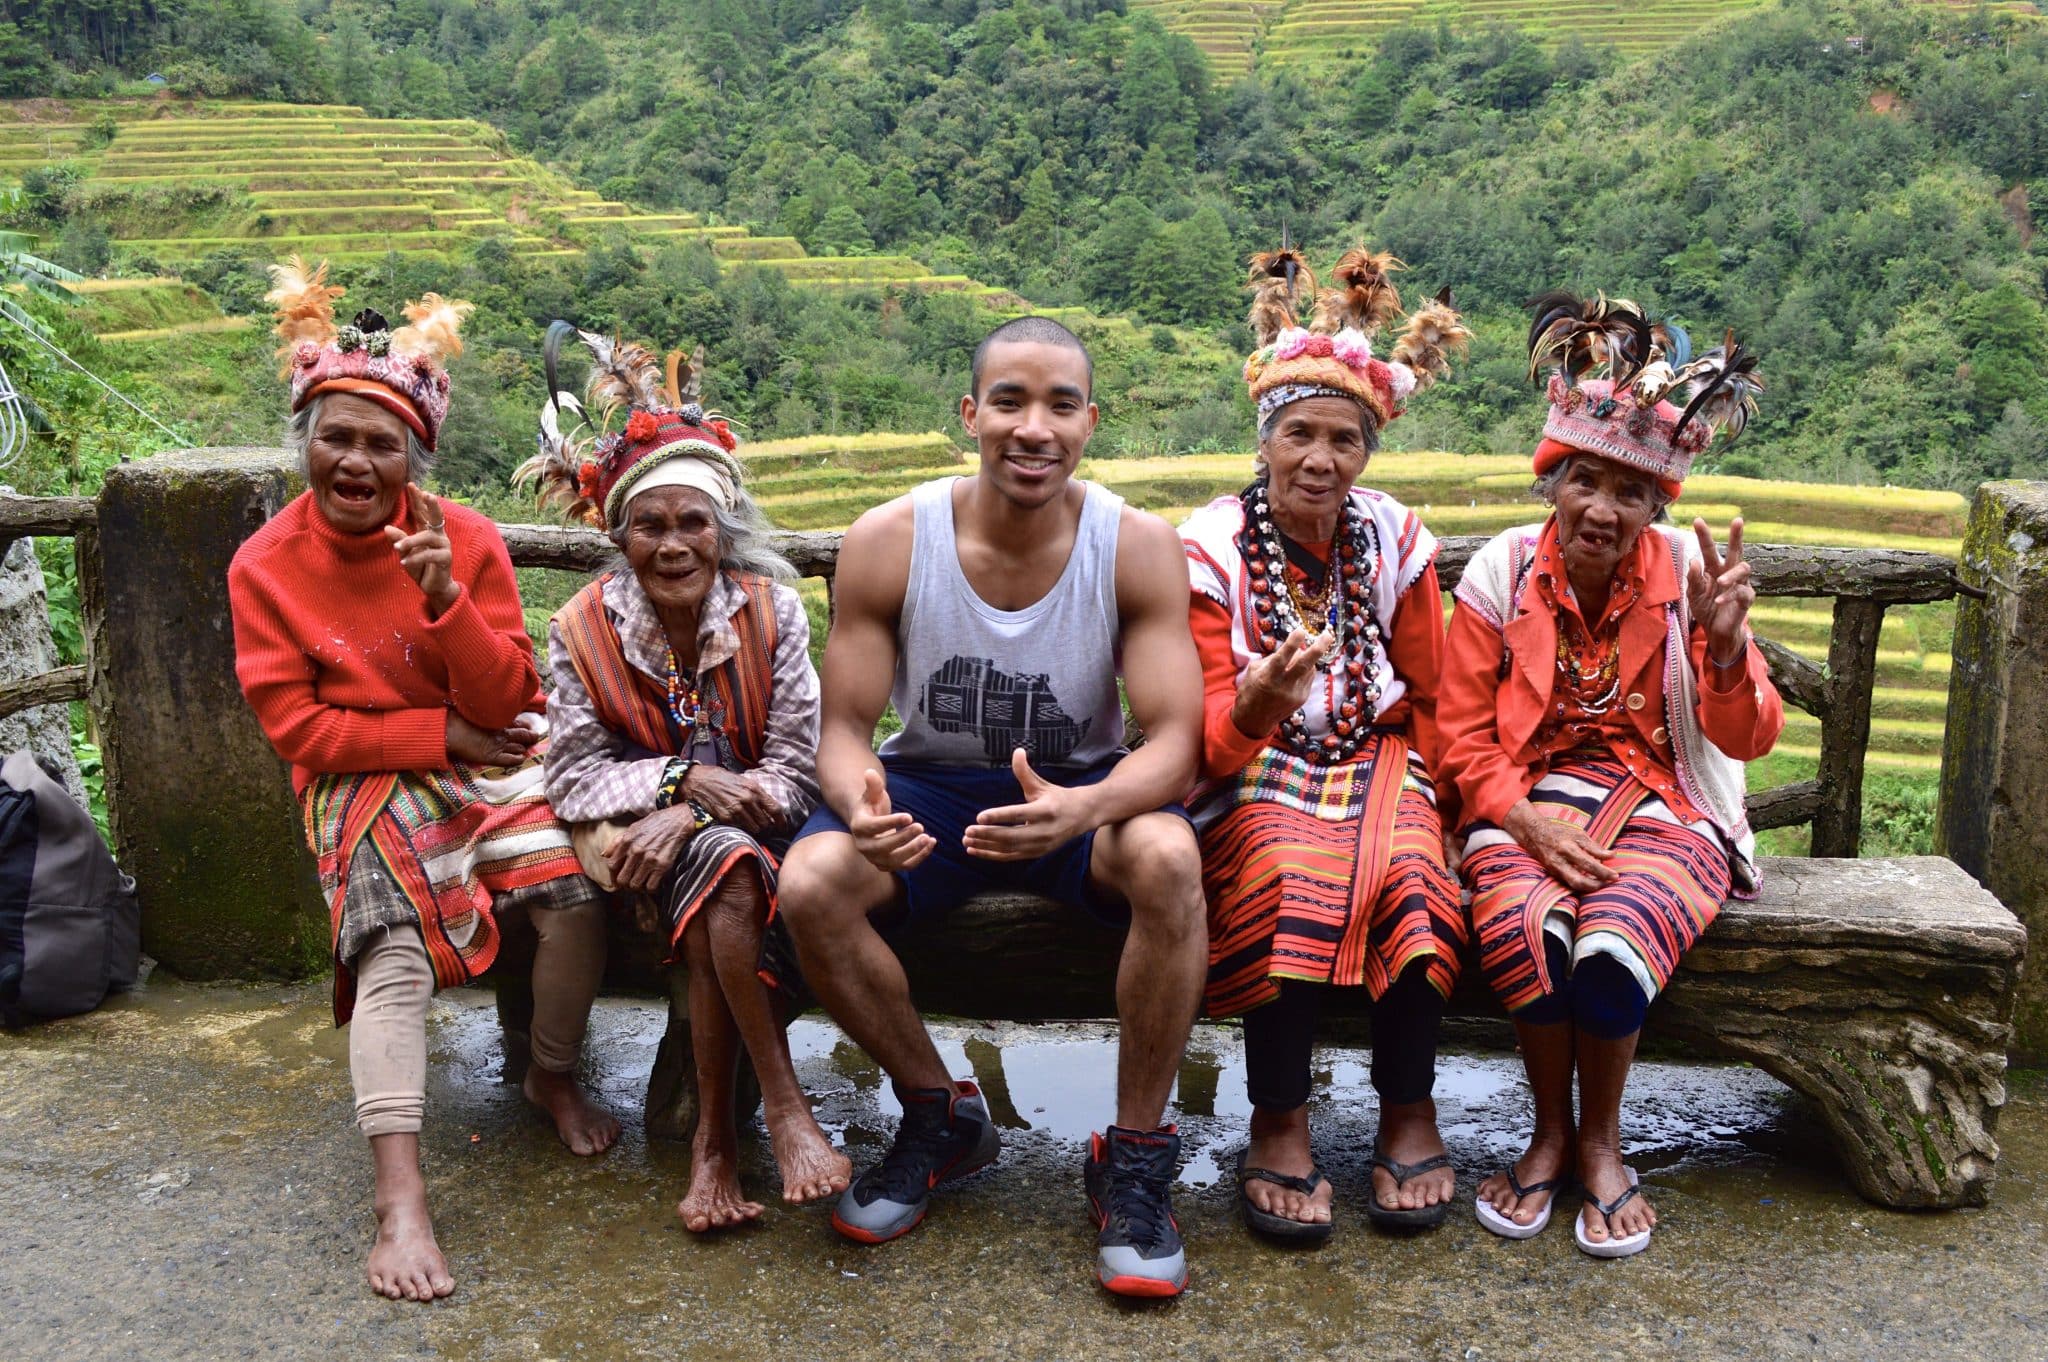 Tyreek with old women in the Philippines